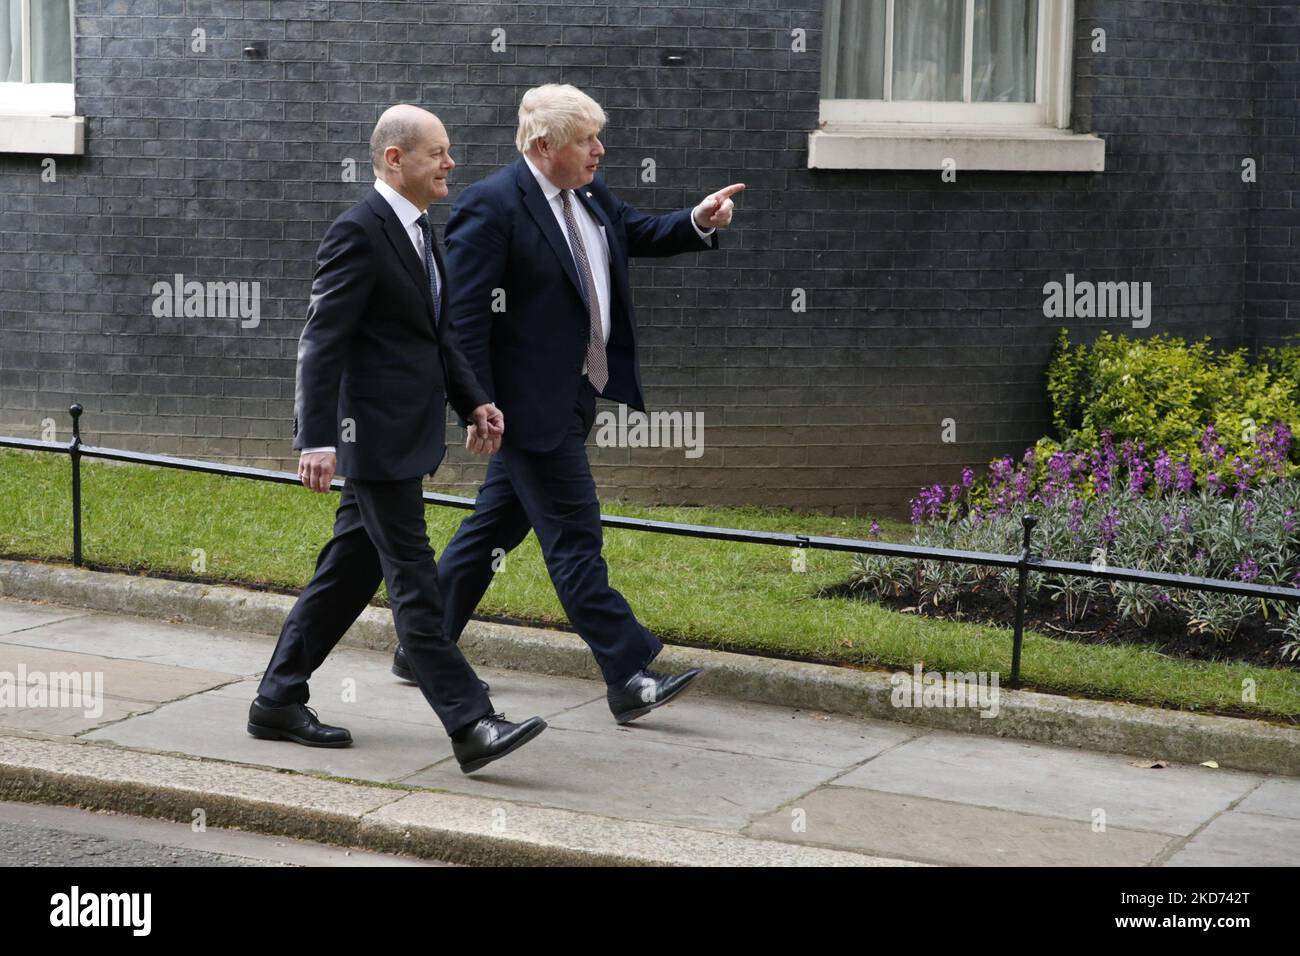 German Chancellor Olaf Scholz (left) and British Prime Minister Boris Johnson (right) walk to a joint press conference on Downing Street in London, England, on April 8, 2022. (Photo by David Cliff/NurPhoto) Stock Photo